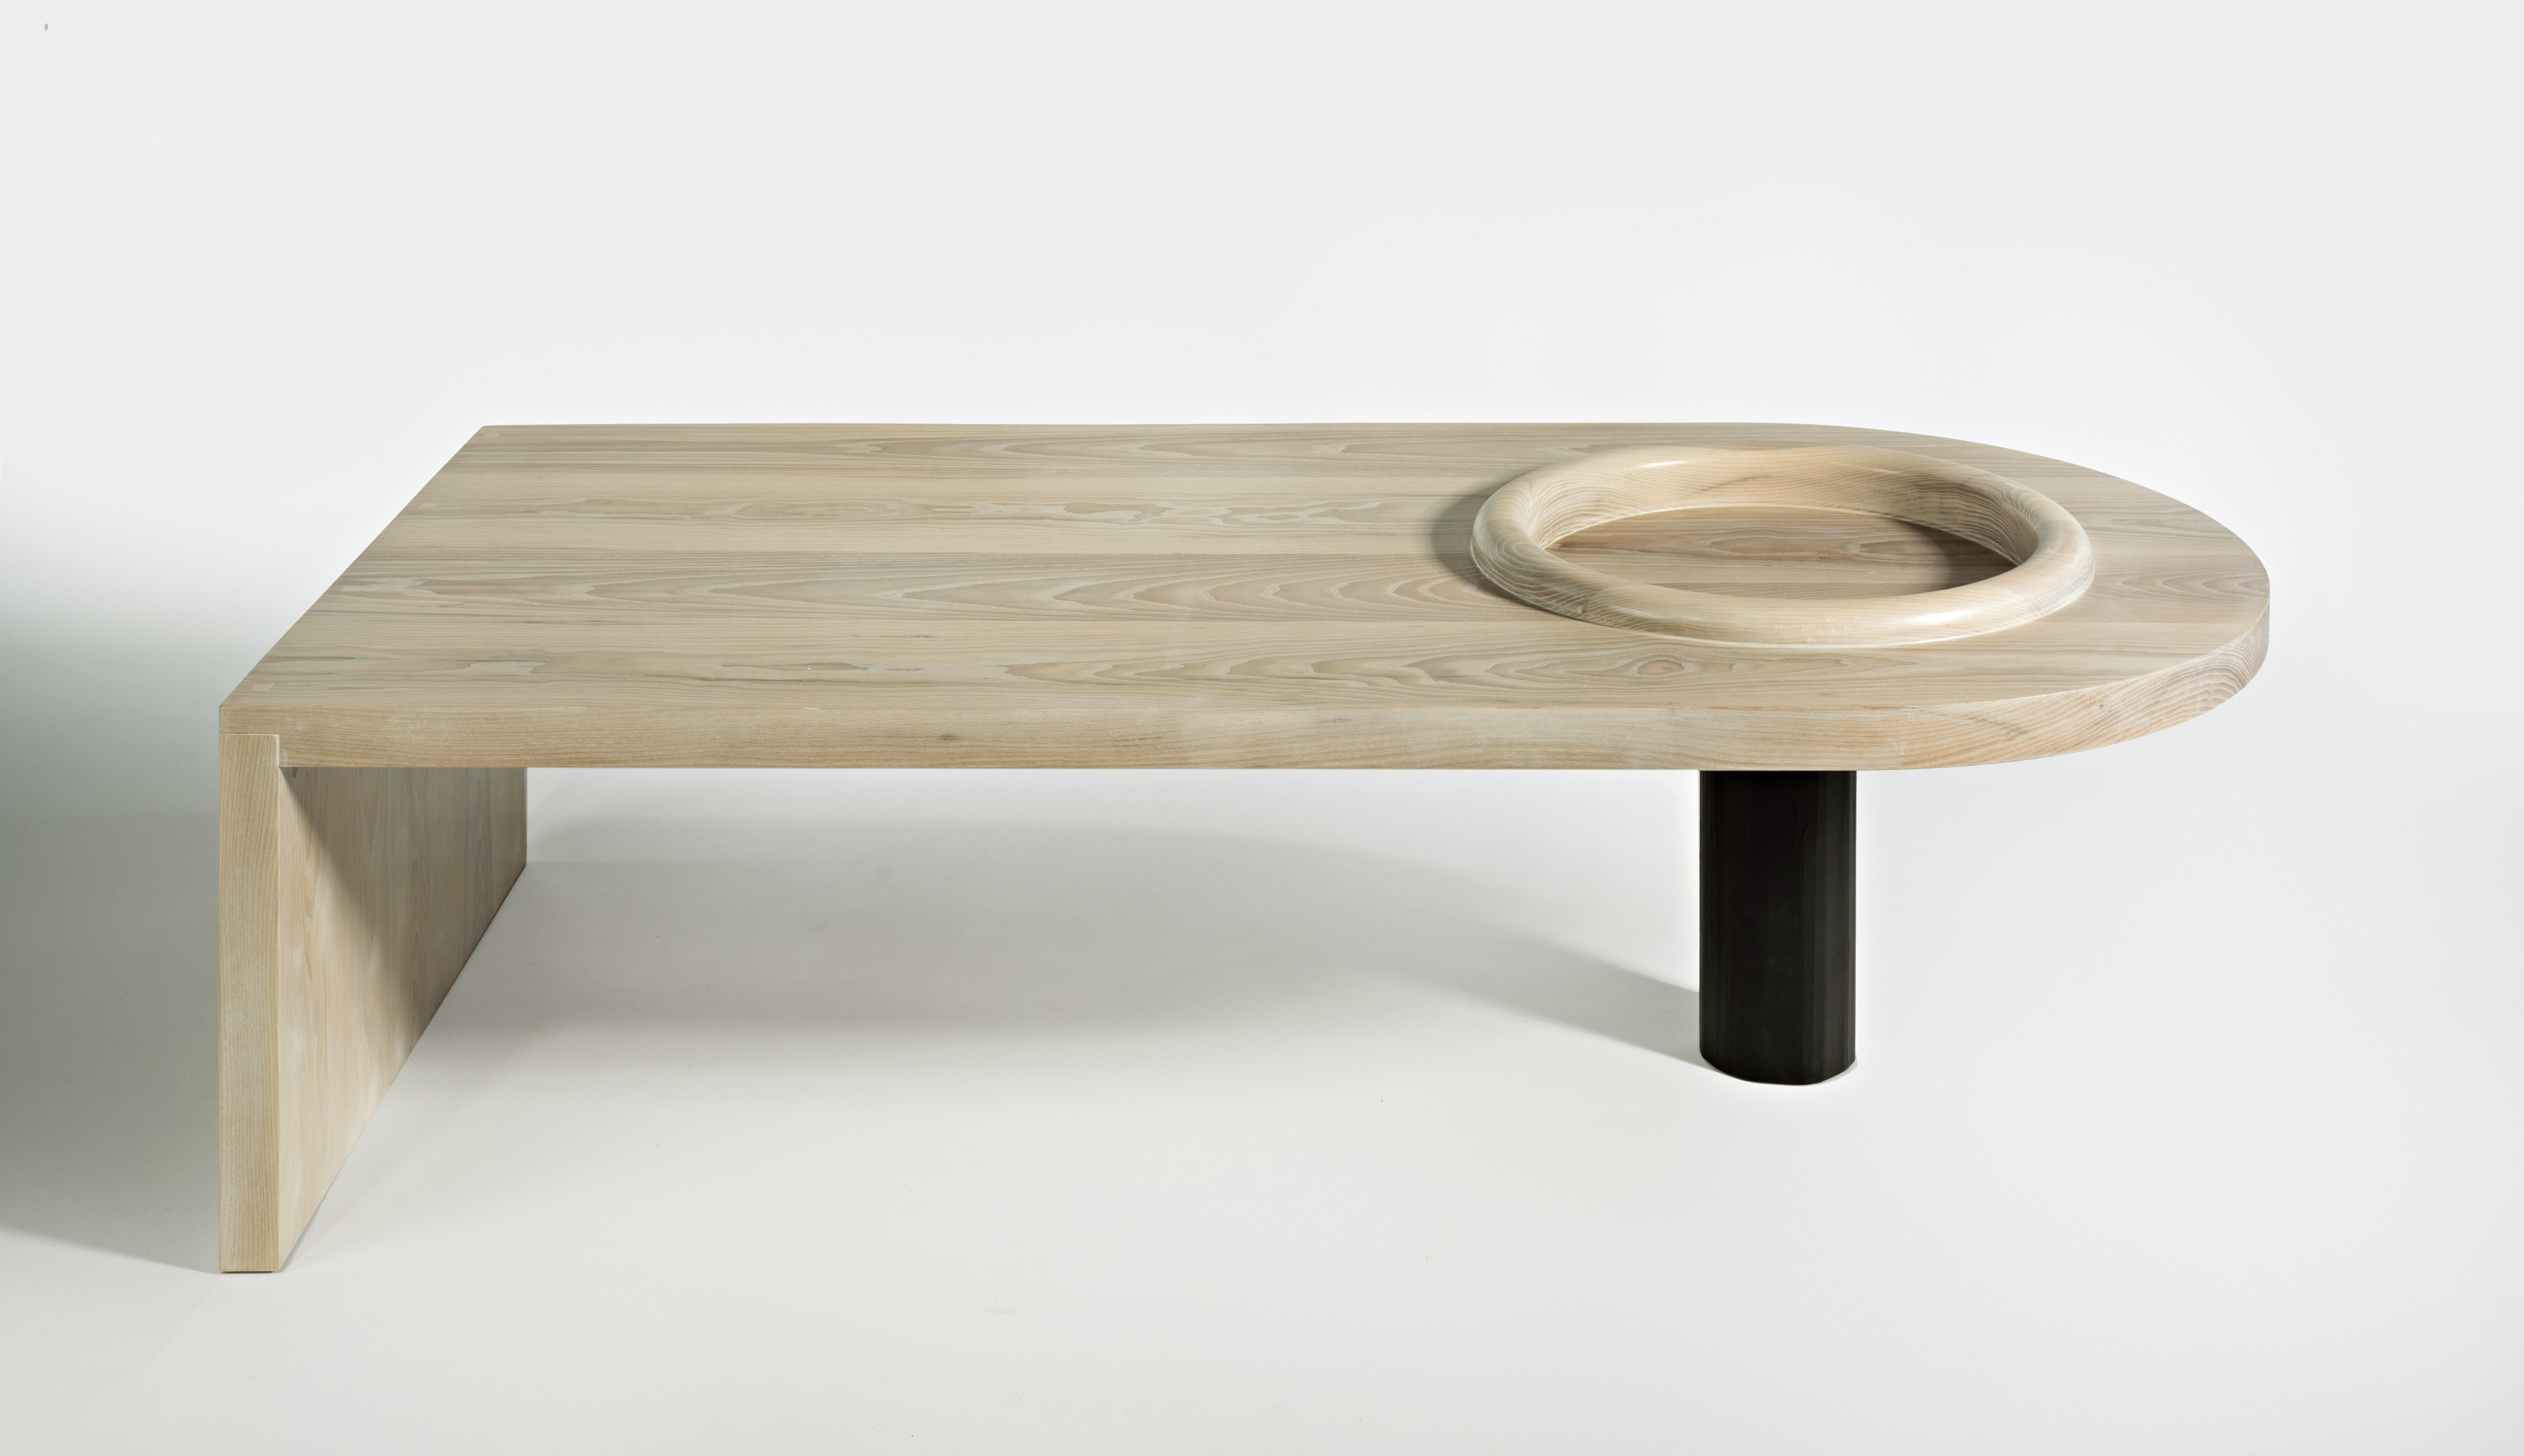 American Monolith Slab Table by Phaedo For Sale